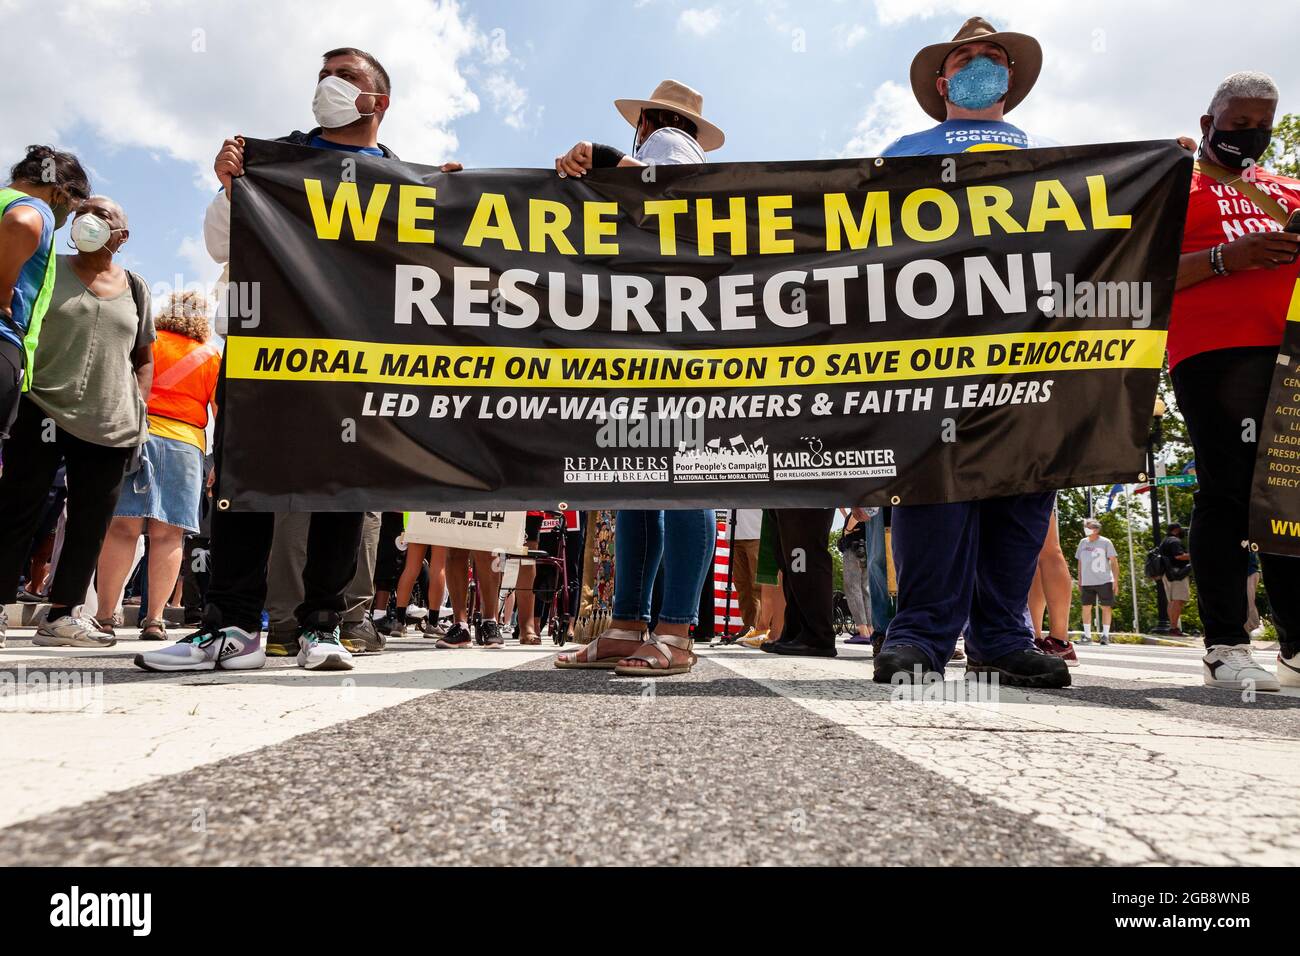 Washington, DC, USA, 2 August 2021.  Pictured: Protesters carry a banner during a Moral Monday march emphasizing one purpose of the event: preservation of democracy in the United States.  The march was sponsored by the Poor People’s Campaign, Kairos Center, and Repairers of the Breach.  Credit: Allison Bailey / Alamy Live News Stock Photo